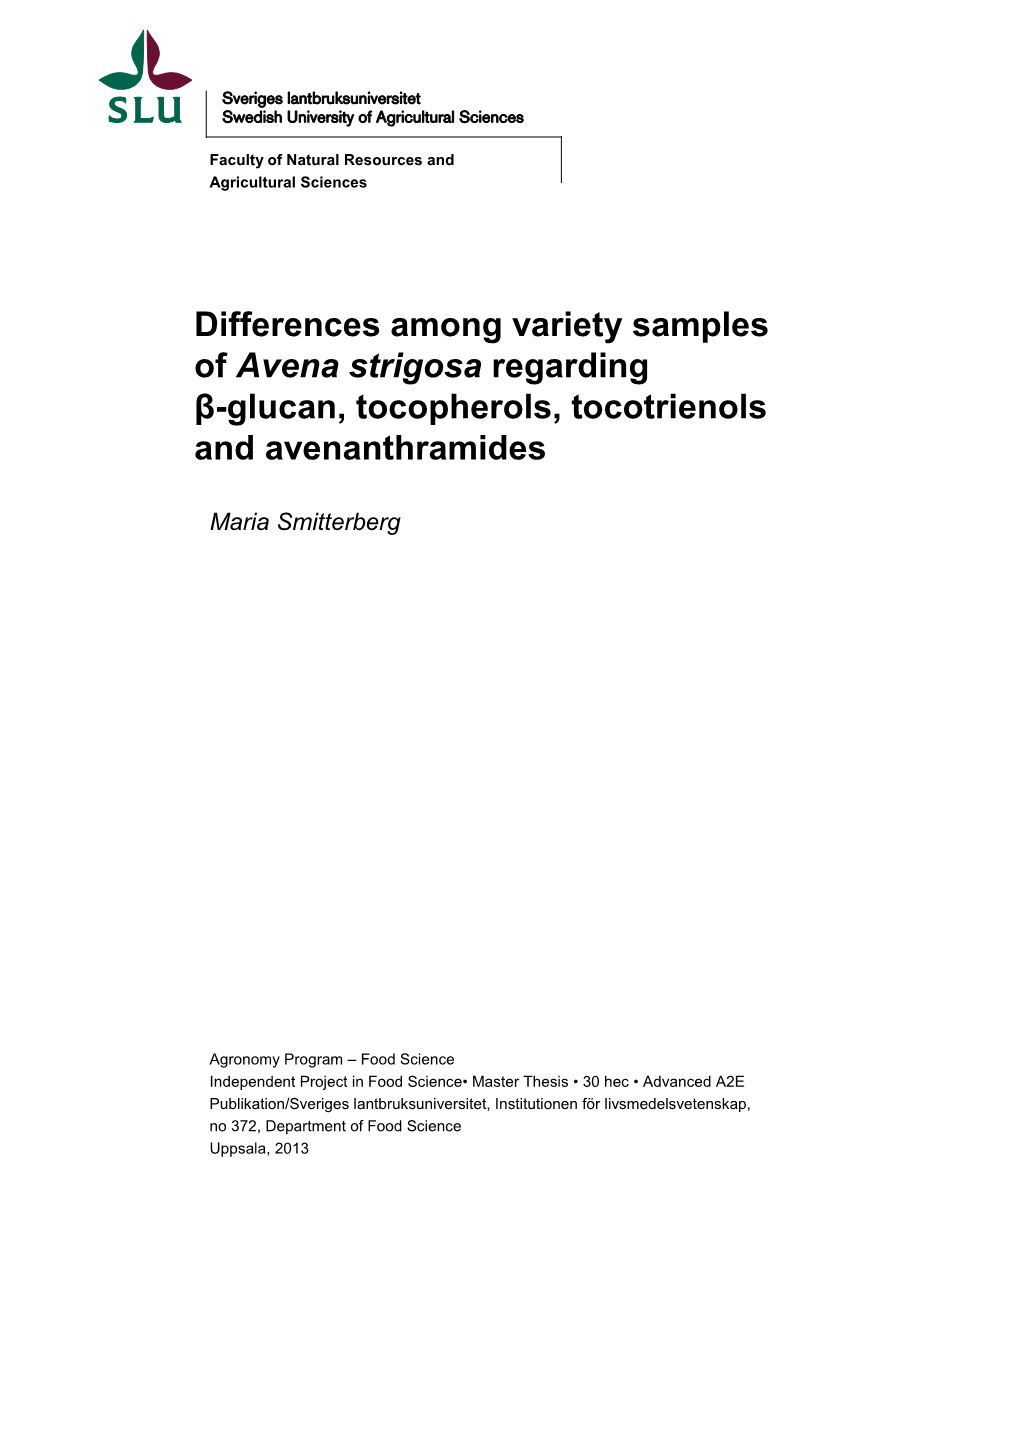 Differences Among Variety Samples of Avena Strigosa Regarding Β-Glucan, Tocopherols, Tocotrienols and Avenanthramides